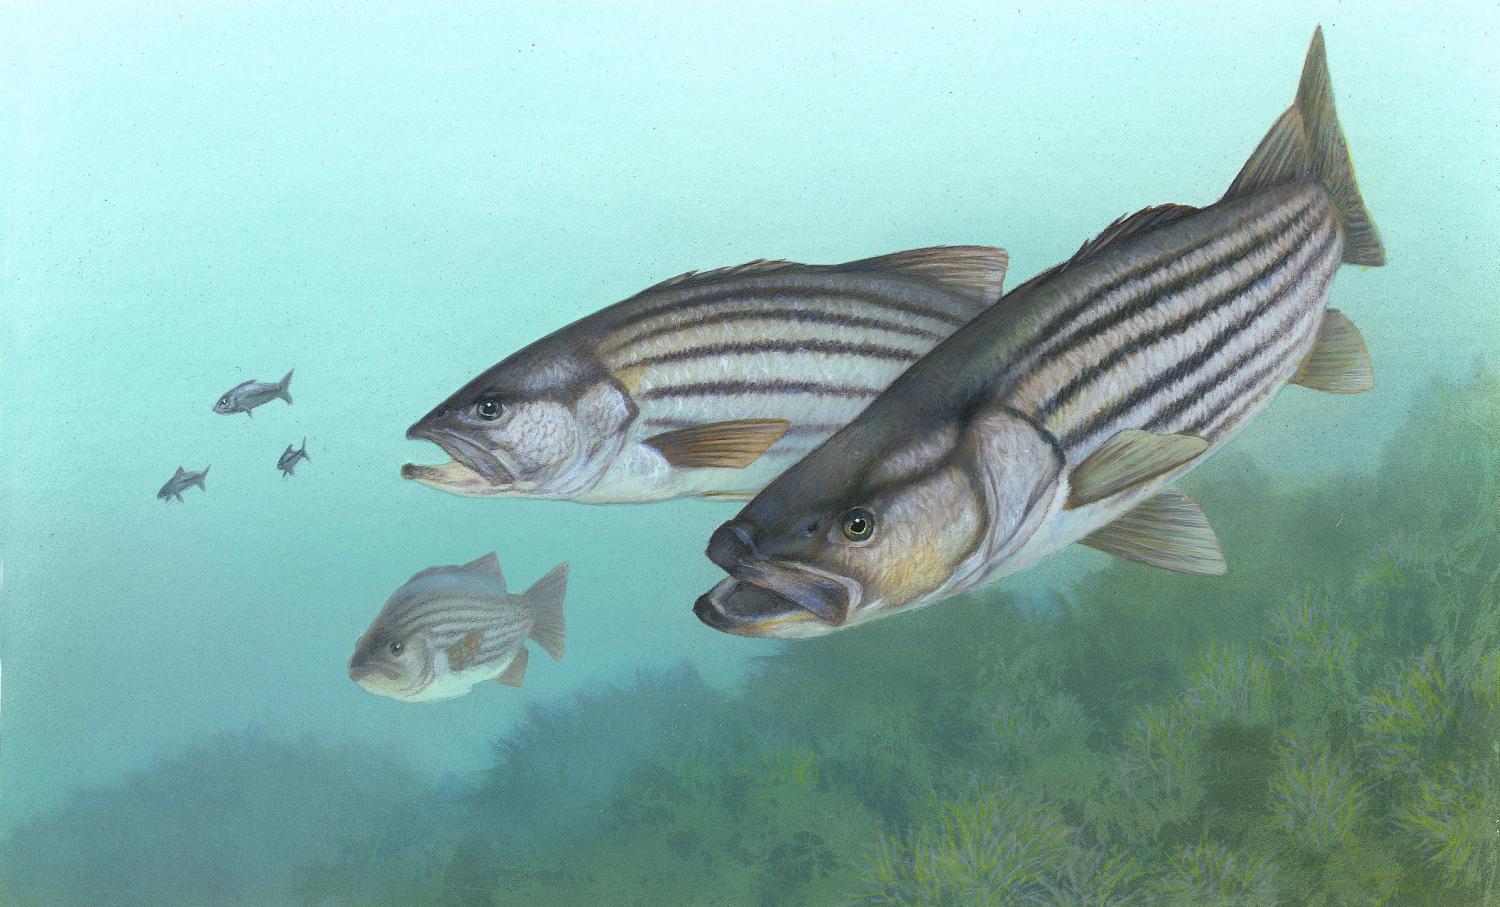 Revelations of genetic diversity of bass species can enhance conservation